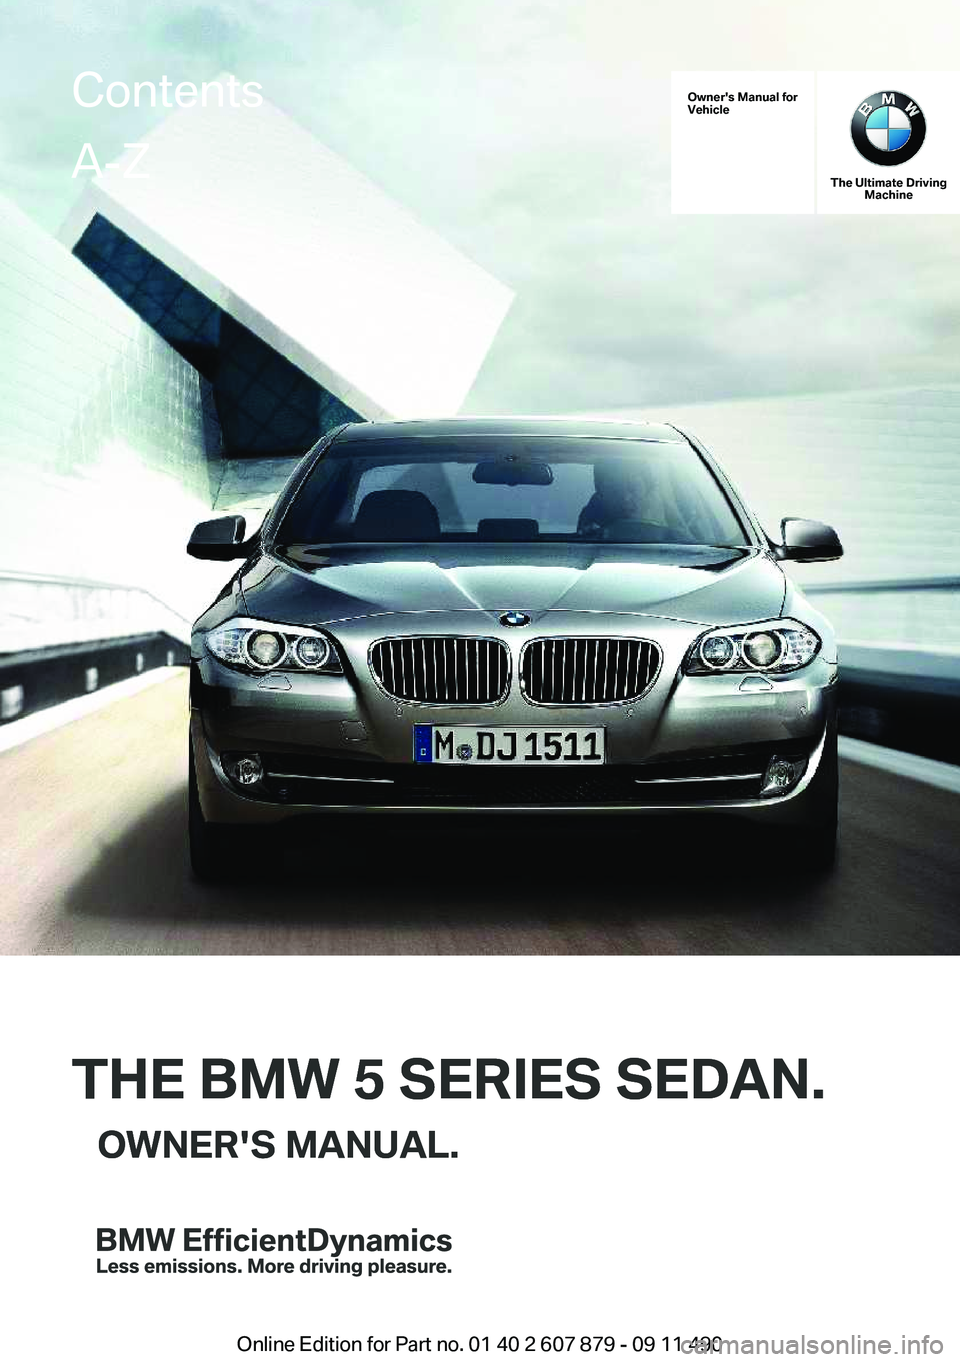 BMW 528I SEDAN 2012  Owners Manual Owner's Manual for
Vehicle
THE BMW 5 SERIES SEDAN.OWNER'S MANUAL.
The Ultimate Driving Machine
THE BMW 5 SERIES SEDAN.OWNER'S MANUAL.
ContentsA-Z
Online Edition for Part no. 01 40 2 607 87